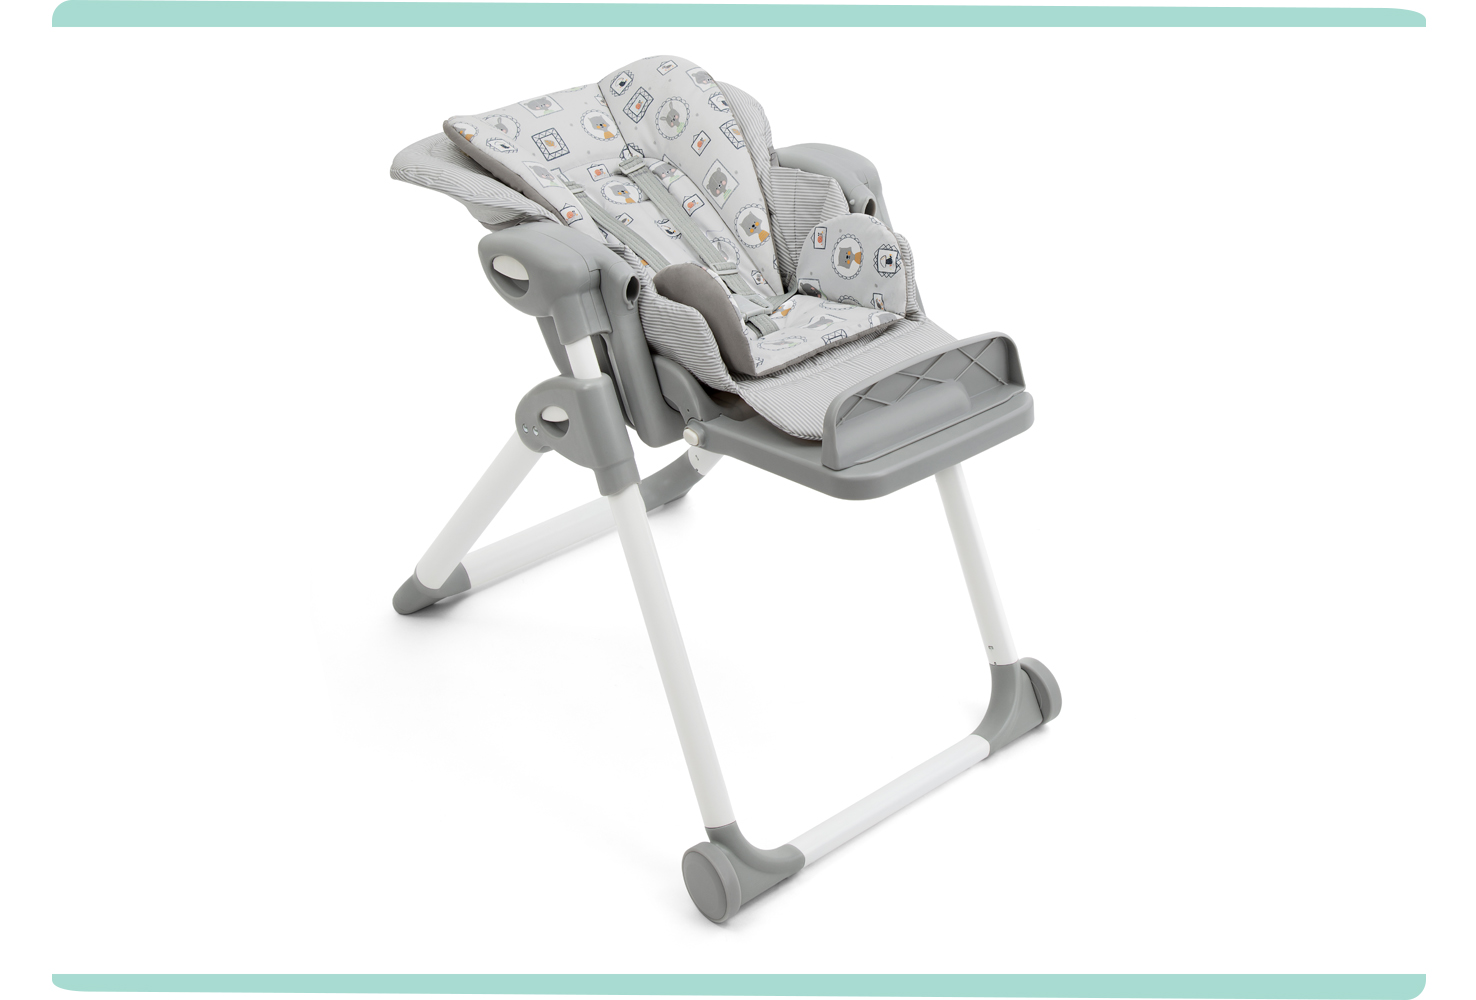 Overhead view of a Mimzy Recline highchair facing at an angle with the seat fully reclined and tray removed.